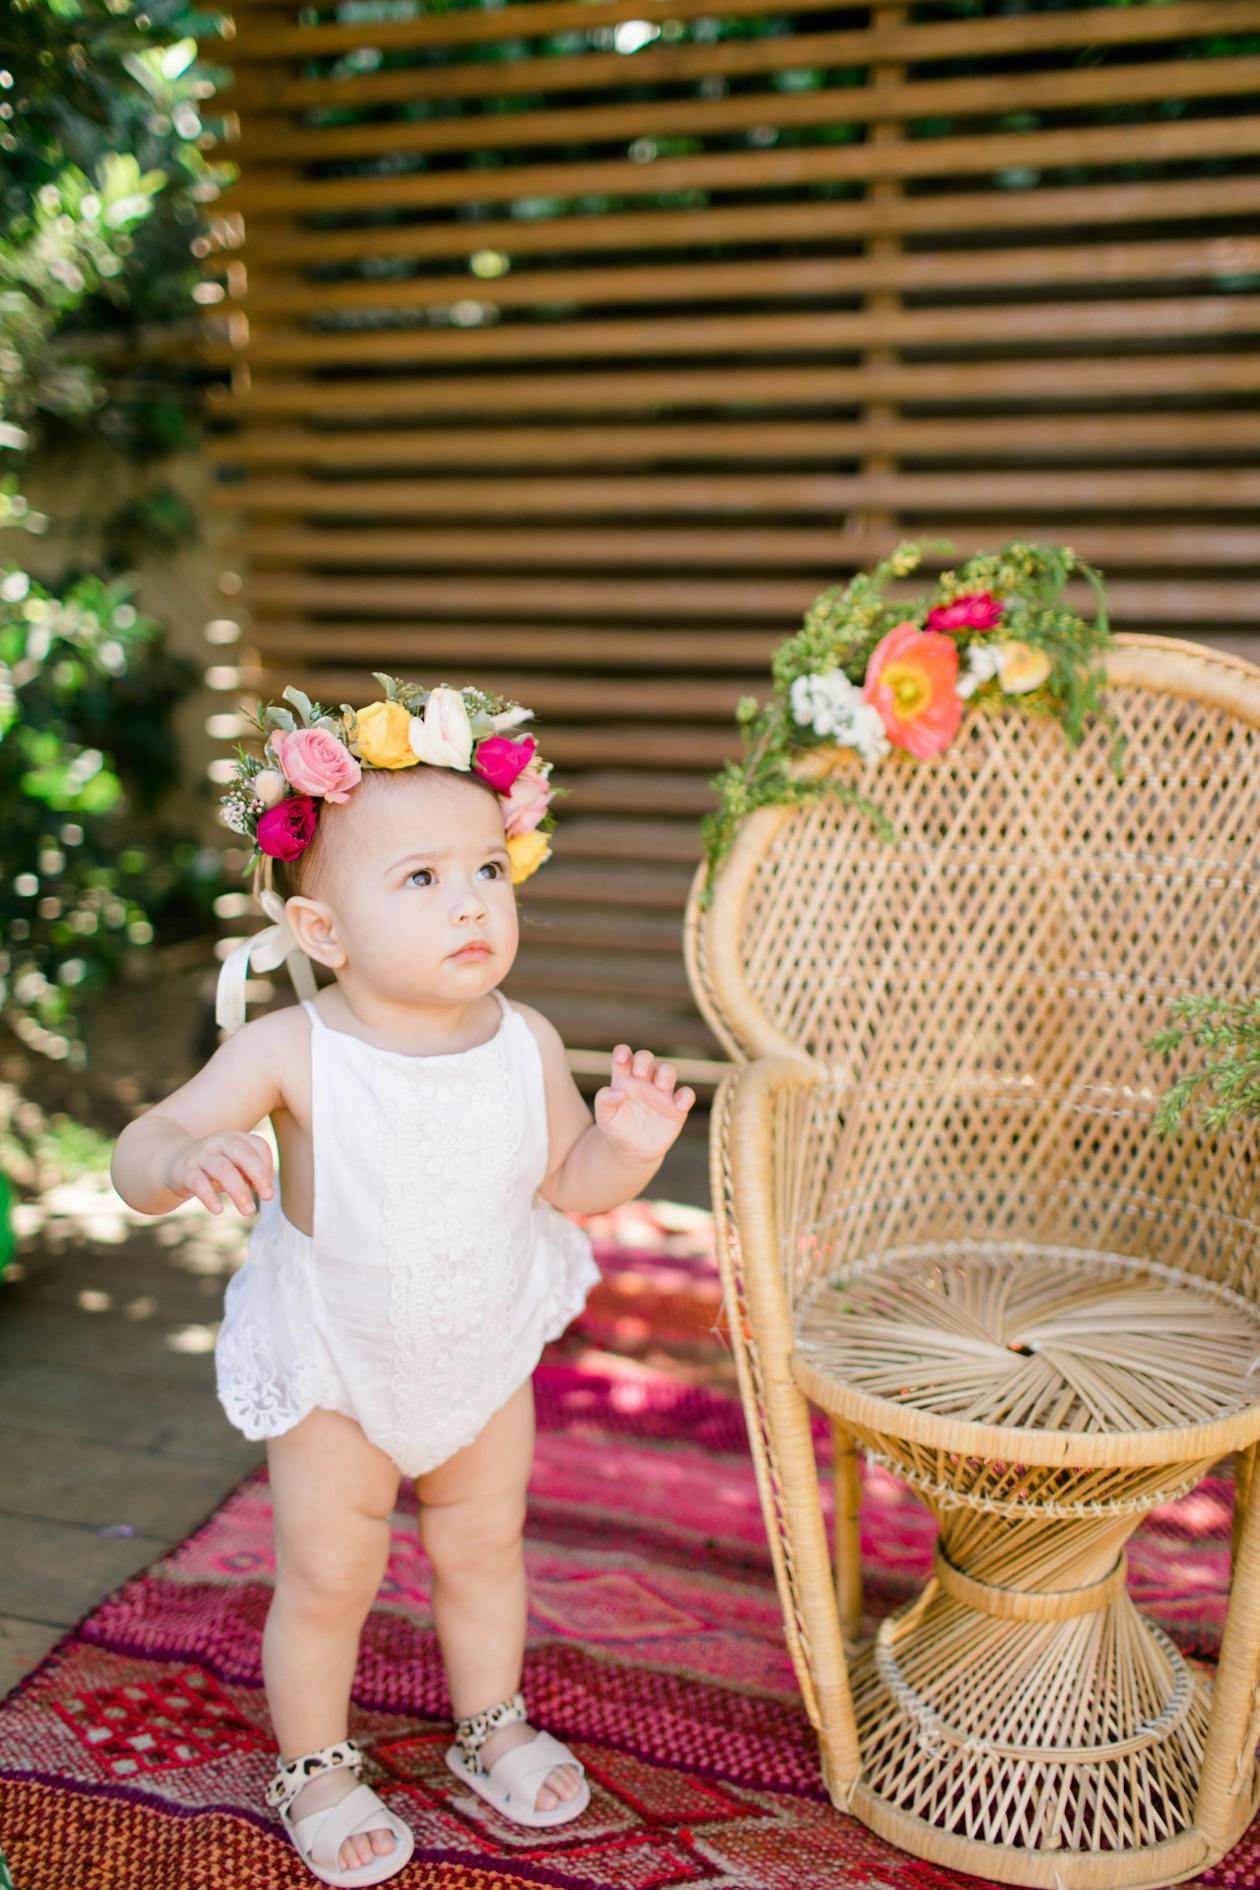 baby with flower crown standing next to whicker chair at her birthday party | PartySlate